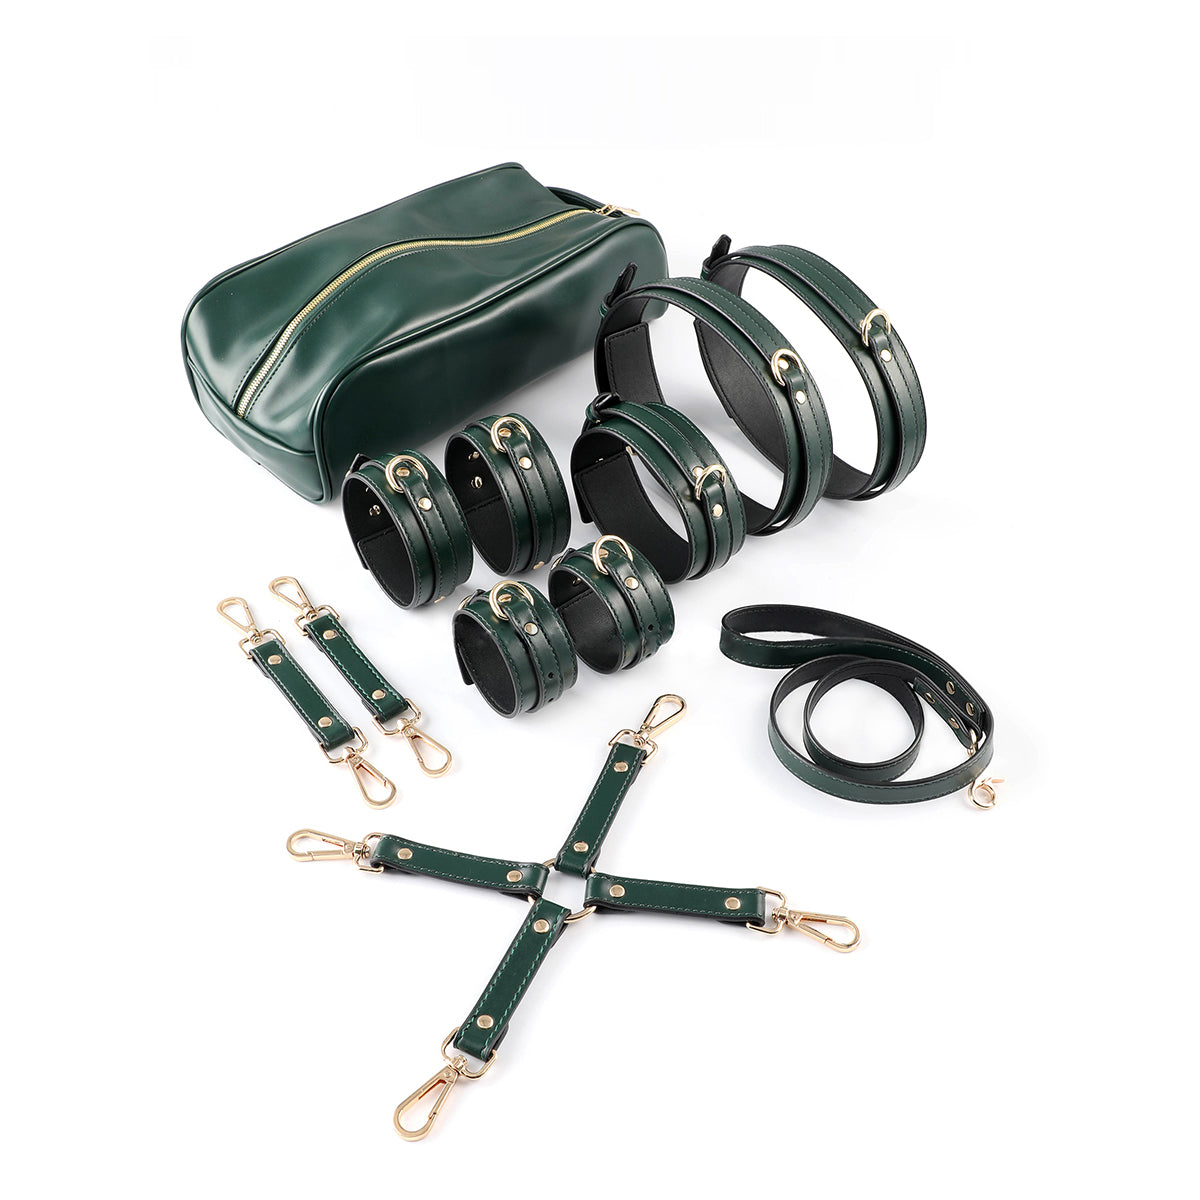 Pure Green Handcrafted 7-Piece Bondage Set with Storege Bag